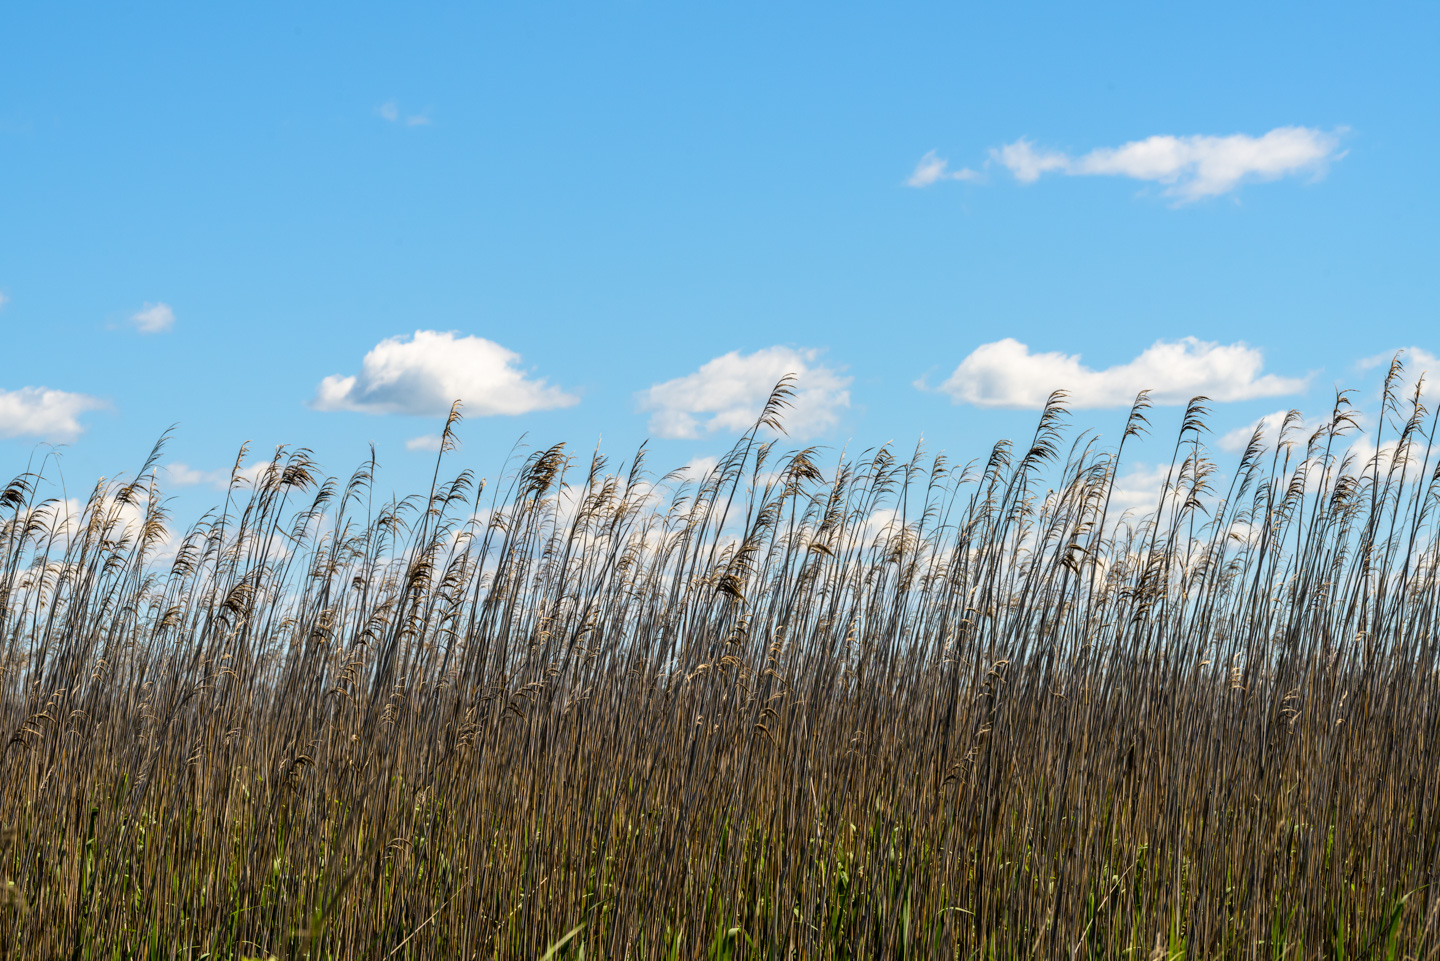 Tall marsh grass with sky behind them